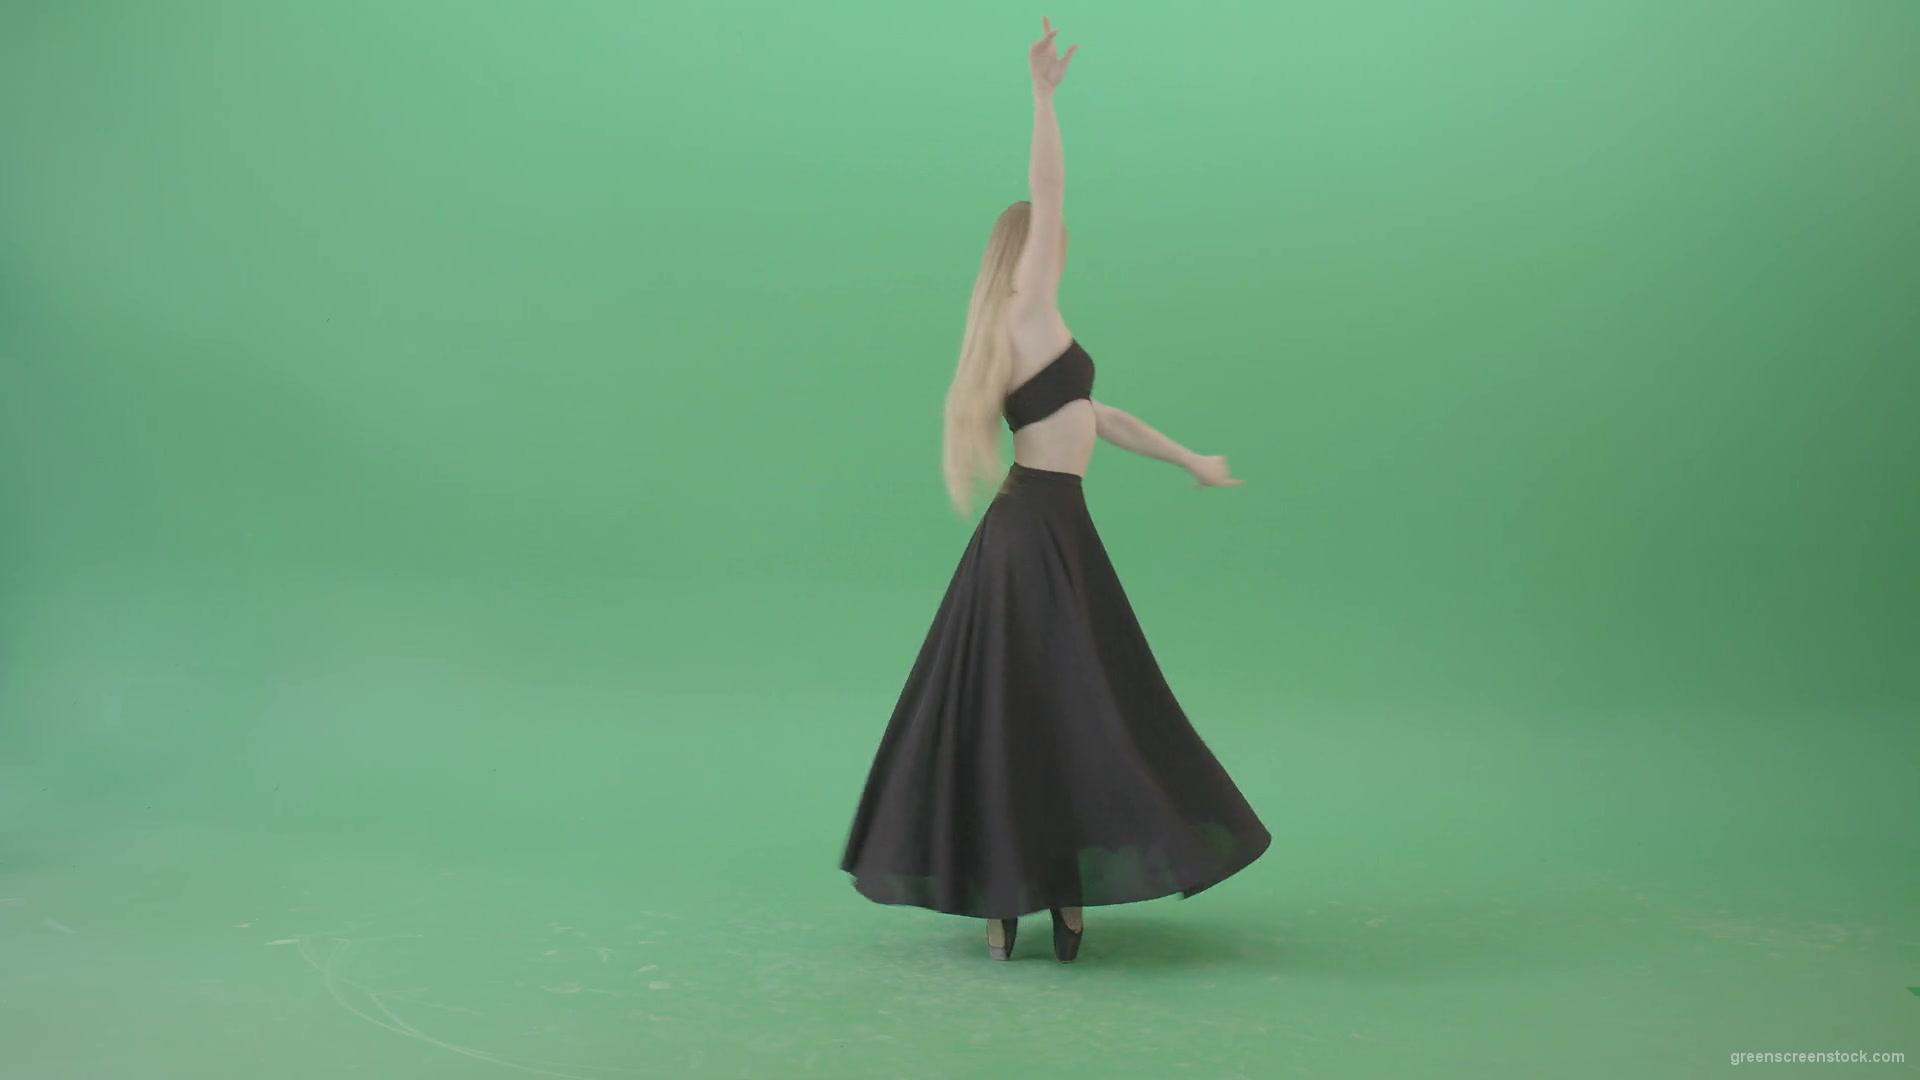 Dancing-in-the-shadow-spinning-on-the-green-screen-ballet-art-by-dancing-girl-4K-Video-Footage-1920_007 Green Screen Stock